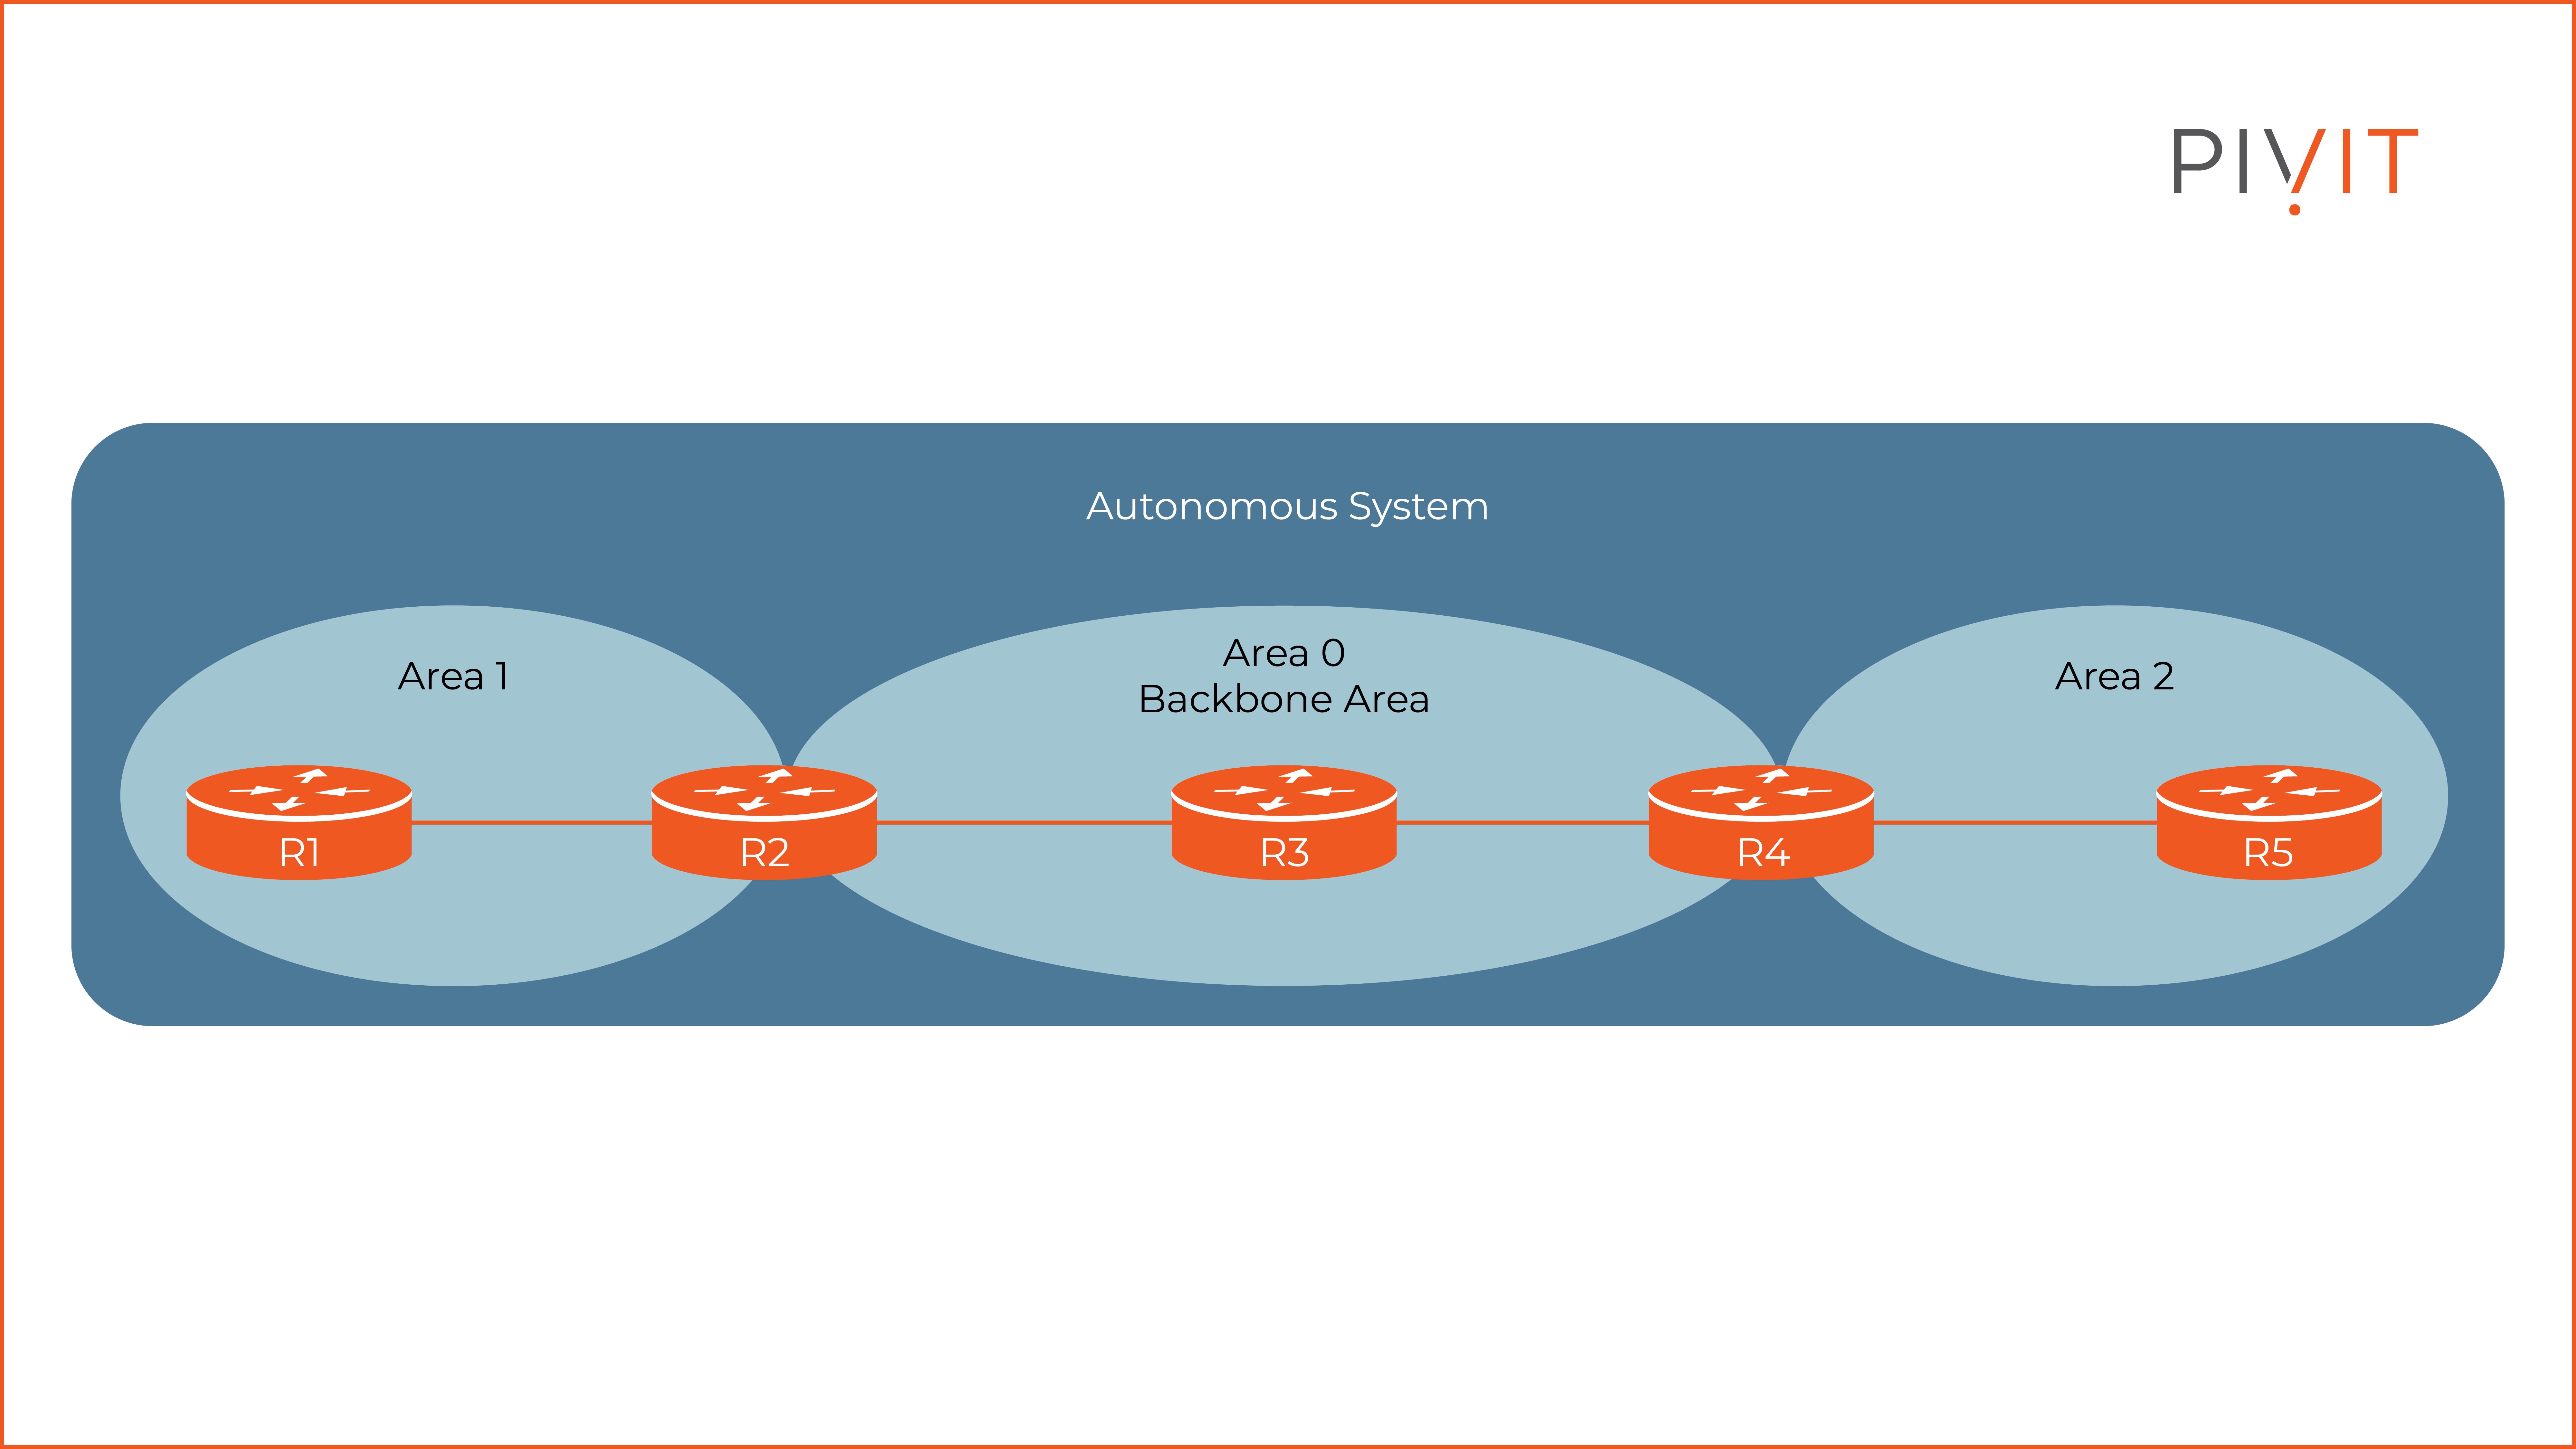 Autonomous System diagram showing Area 0 (backbone), 1, and 2 as well as routers 1 through 5